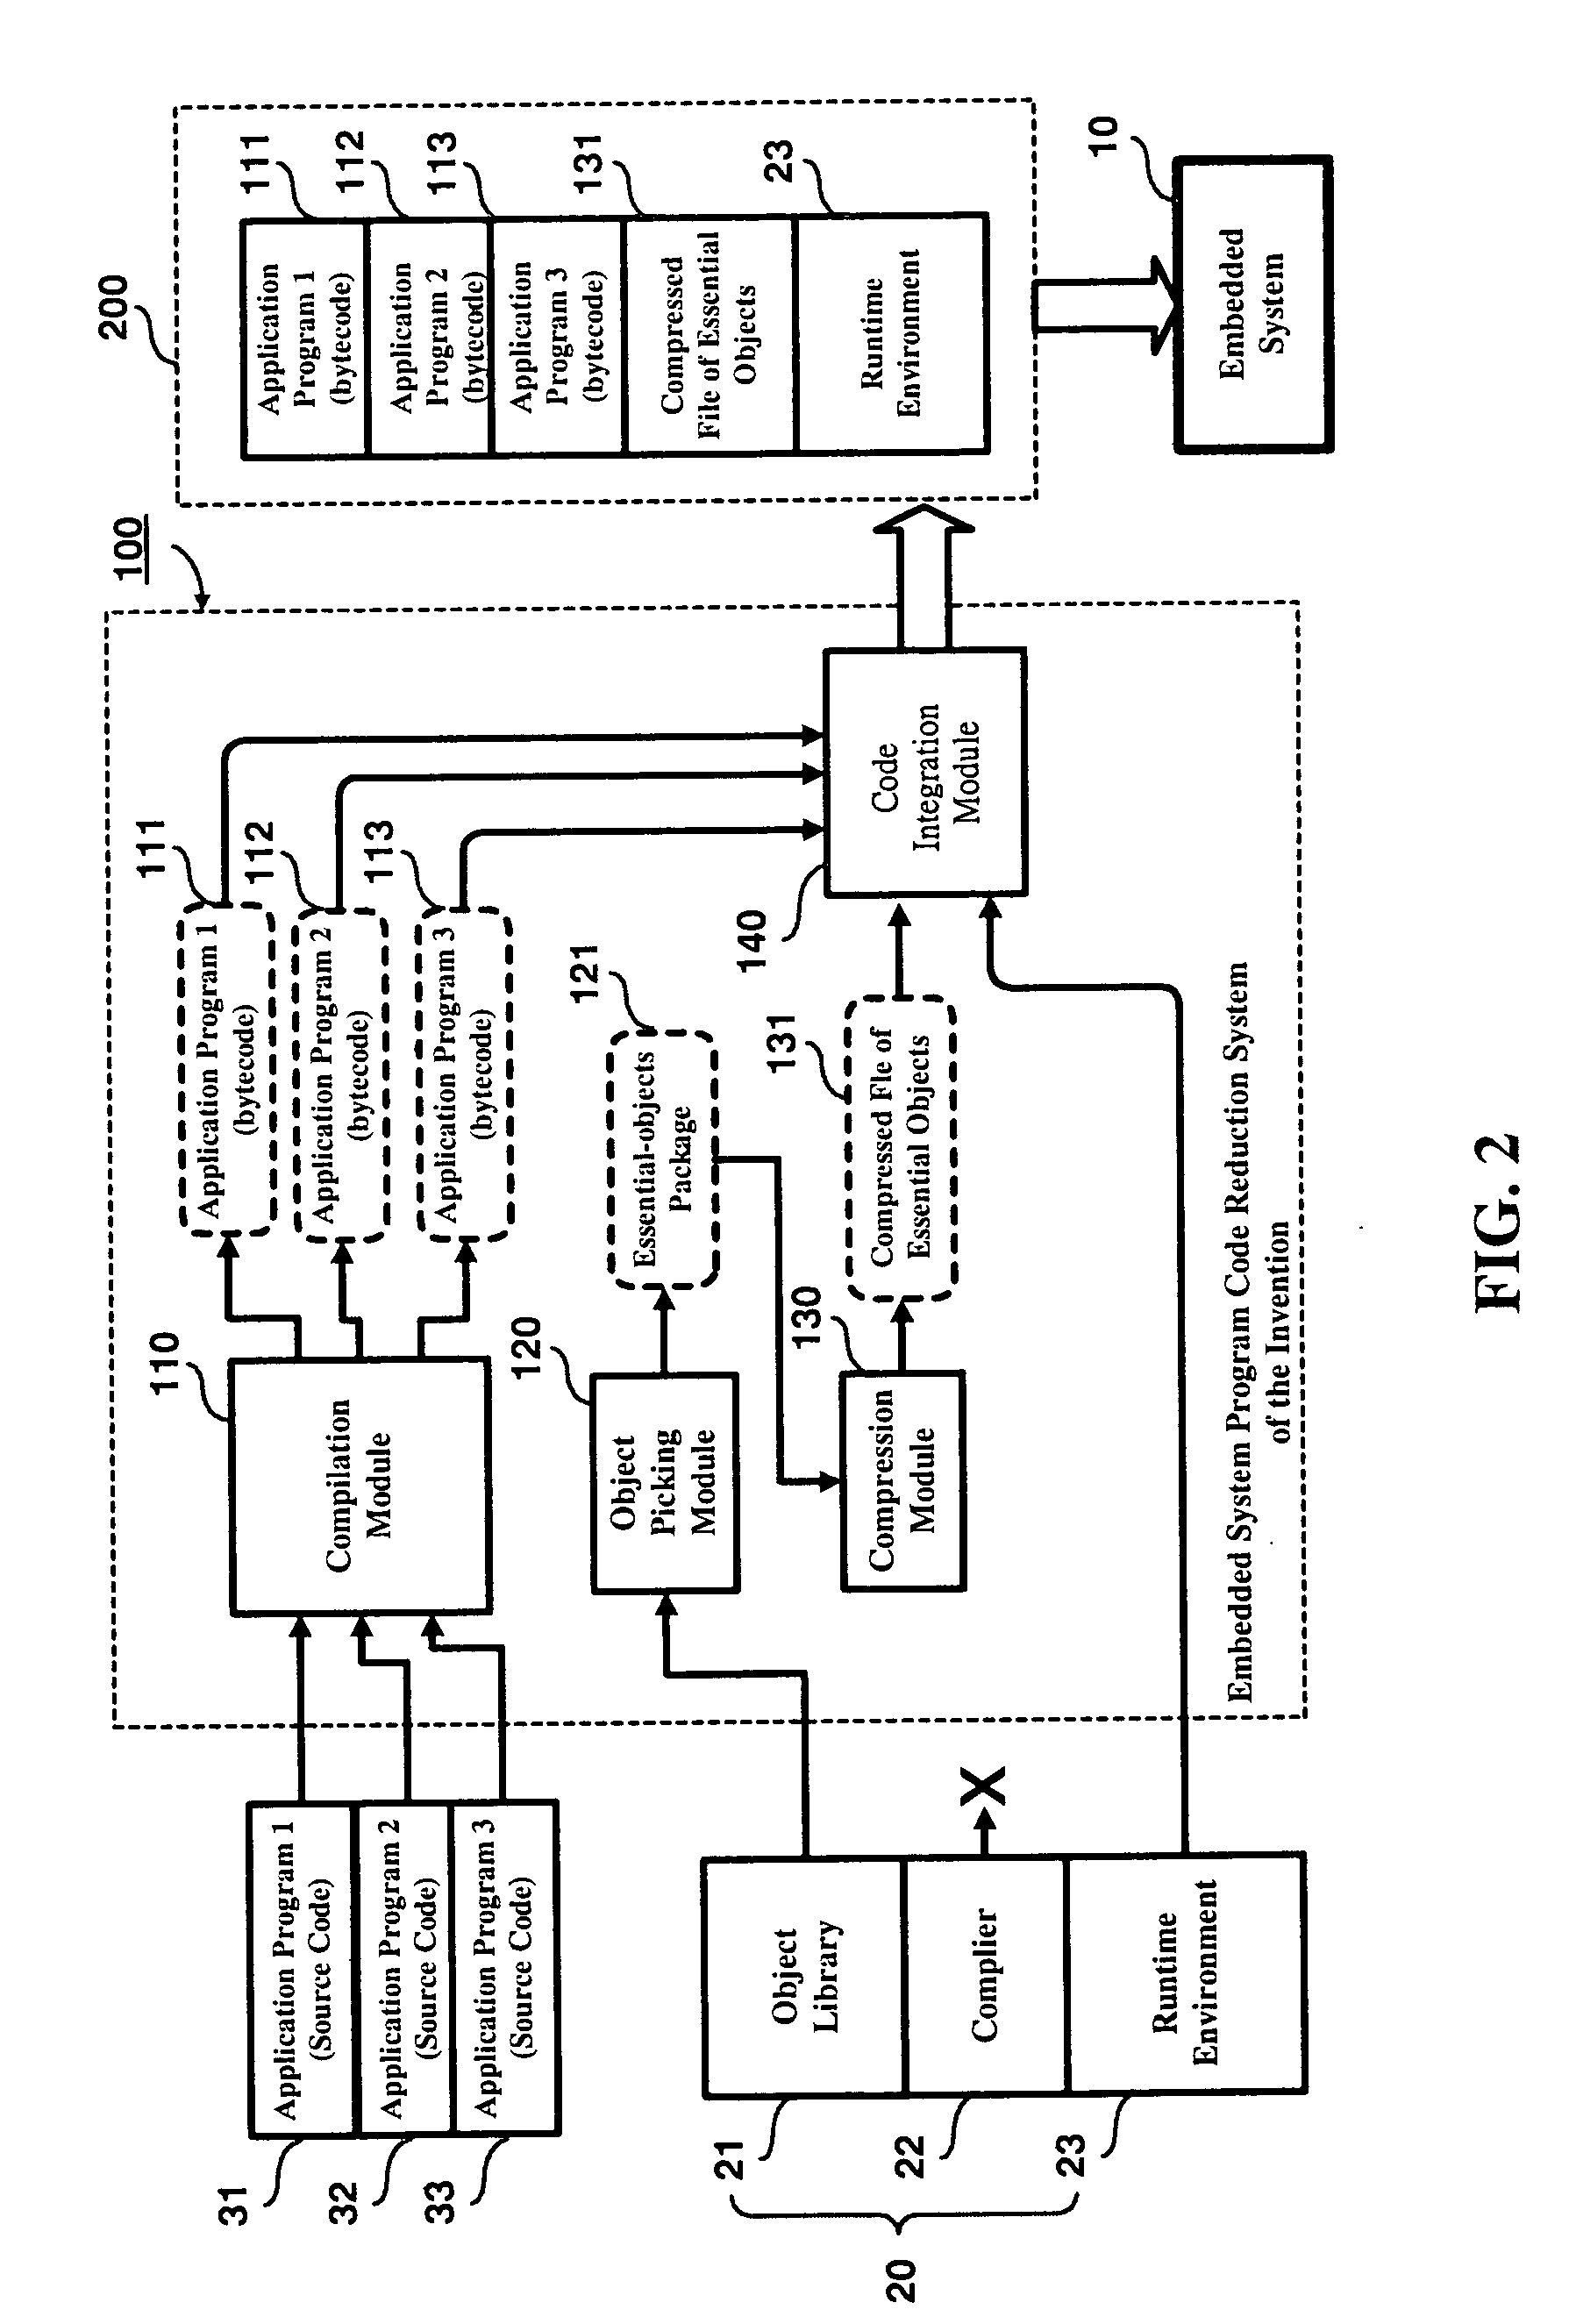 Embedded system program code reduction method and system